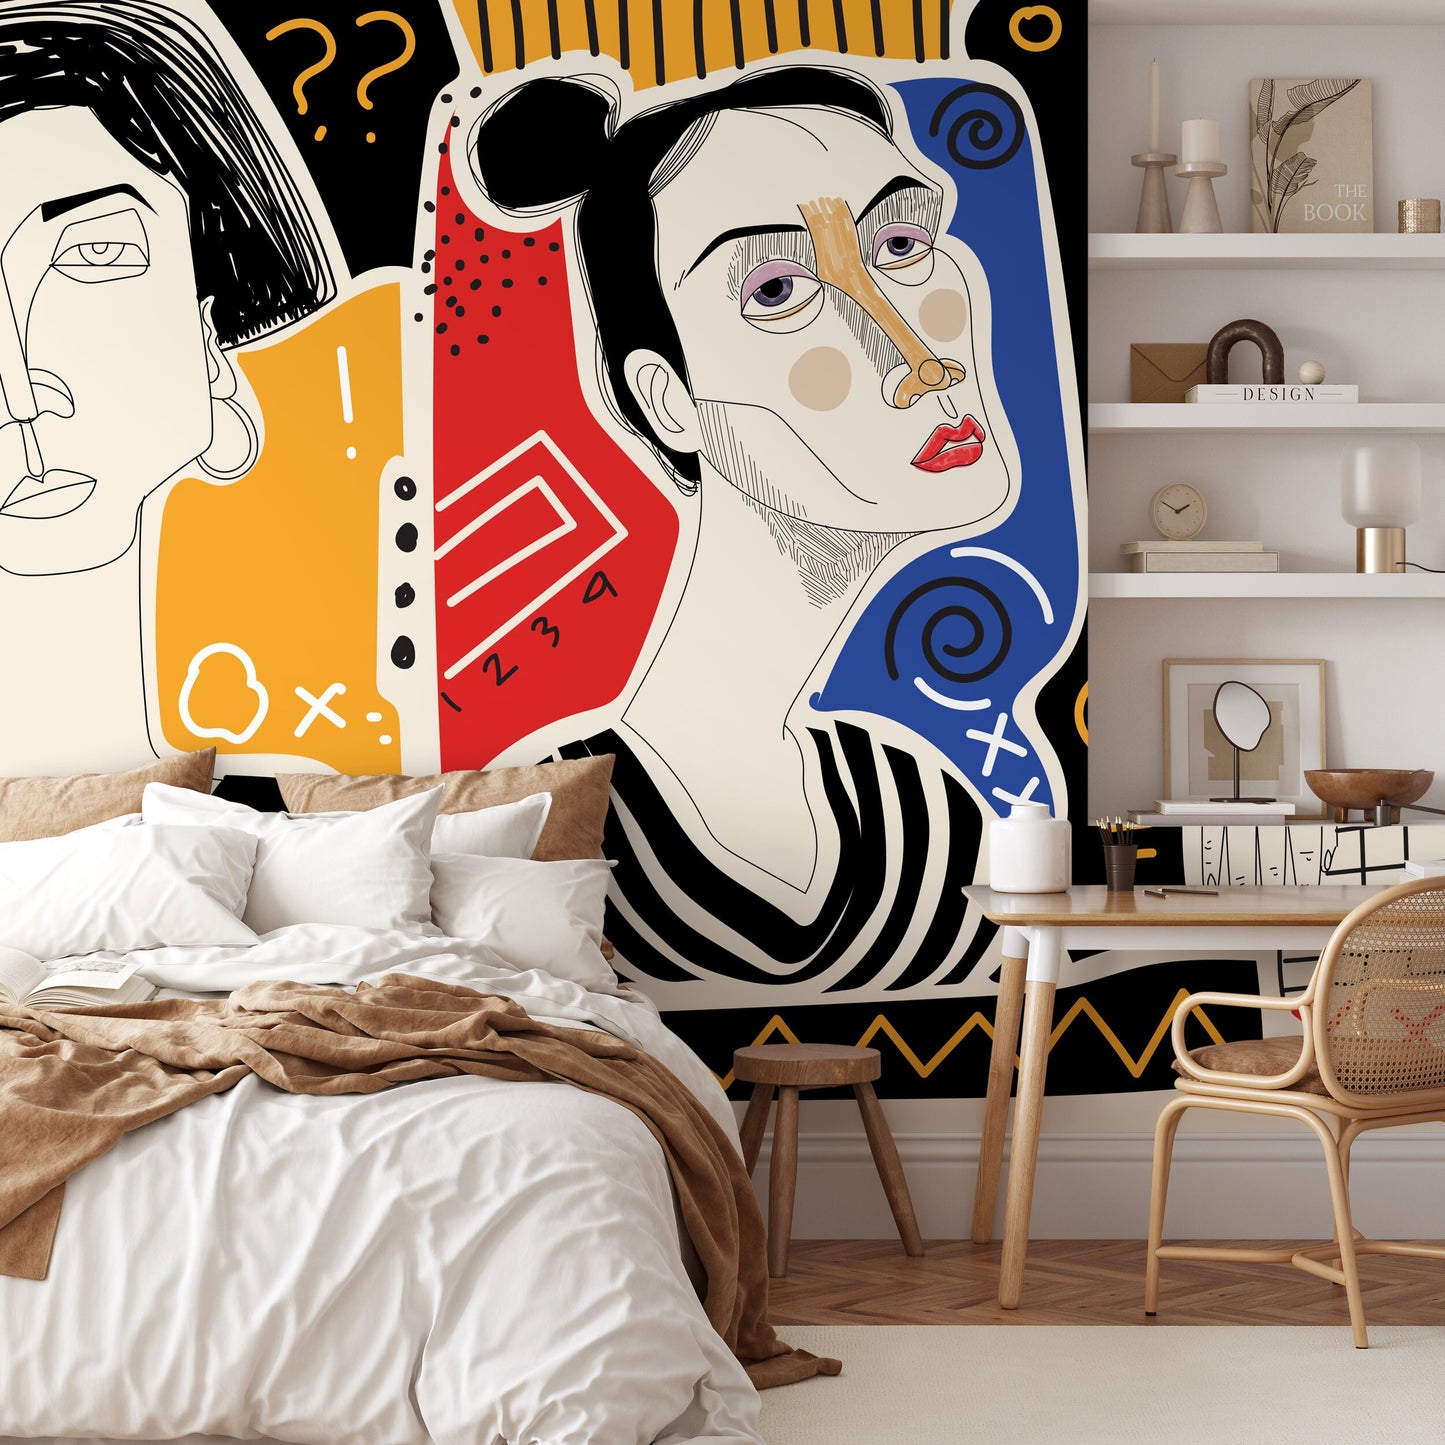 Colorful Abstract Mural Modern Wallpaper Woman Faces Hand Drawing Wallpaper Peel and Stick Wallpaper Home Decor - D579